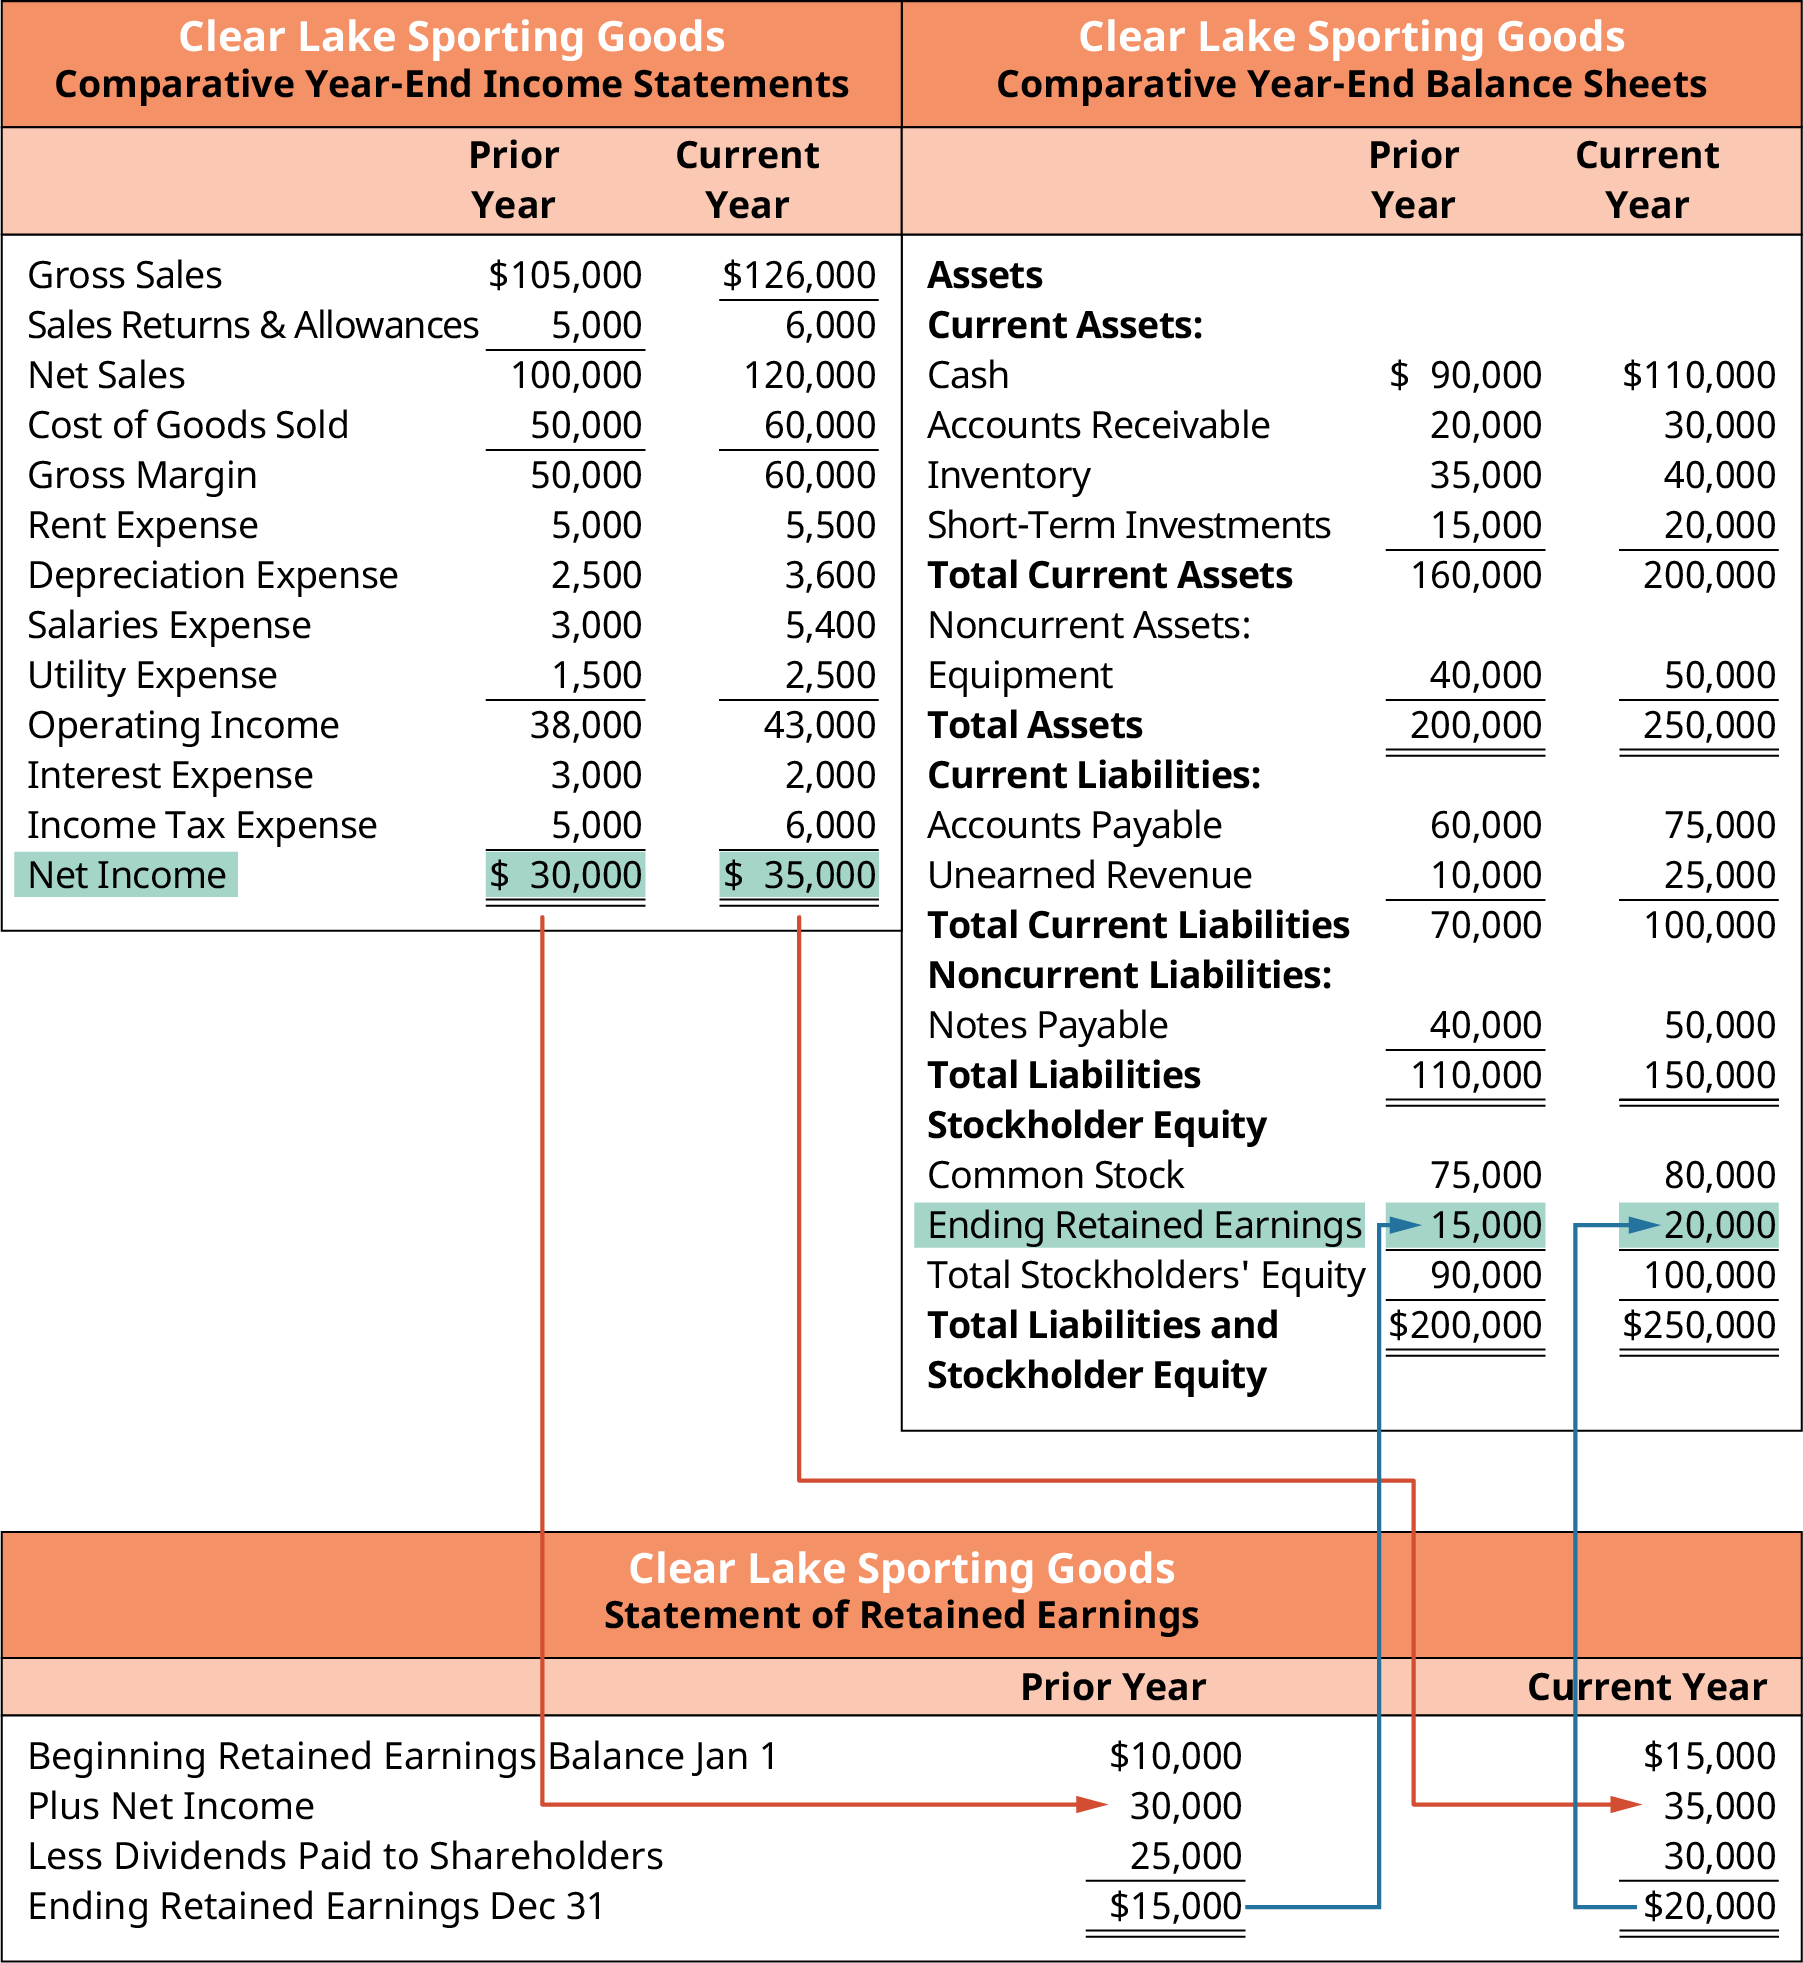 Connections Between Clear Lake Sporting Goods’ Balance Sheet and Income Statement. Clear Lake’s net income flows from the income statement into the statement of retained earnings. The ending retained earnings flows from the statement of retained earnings to the comparative year-end balance sheet.